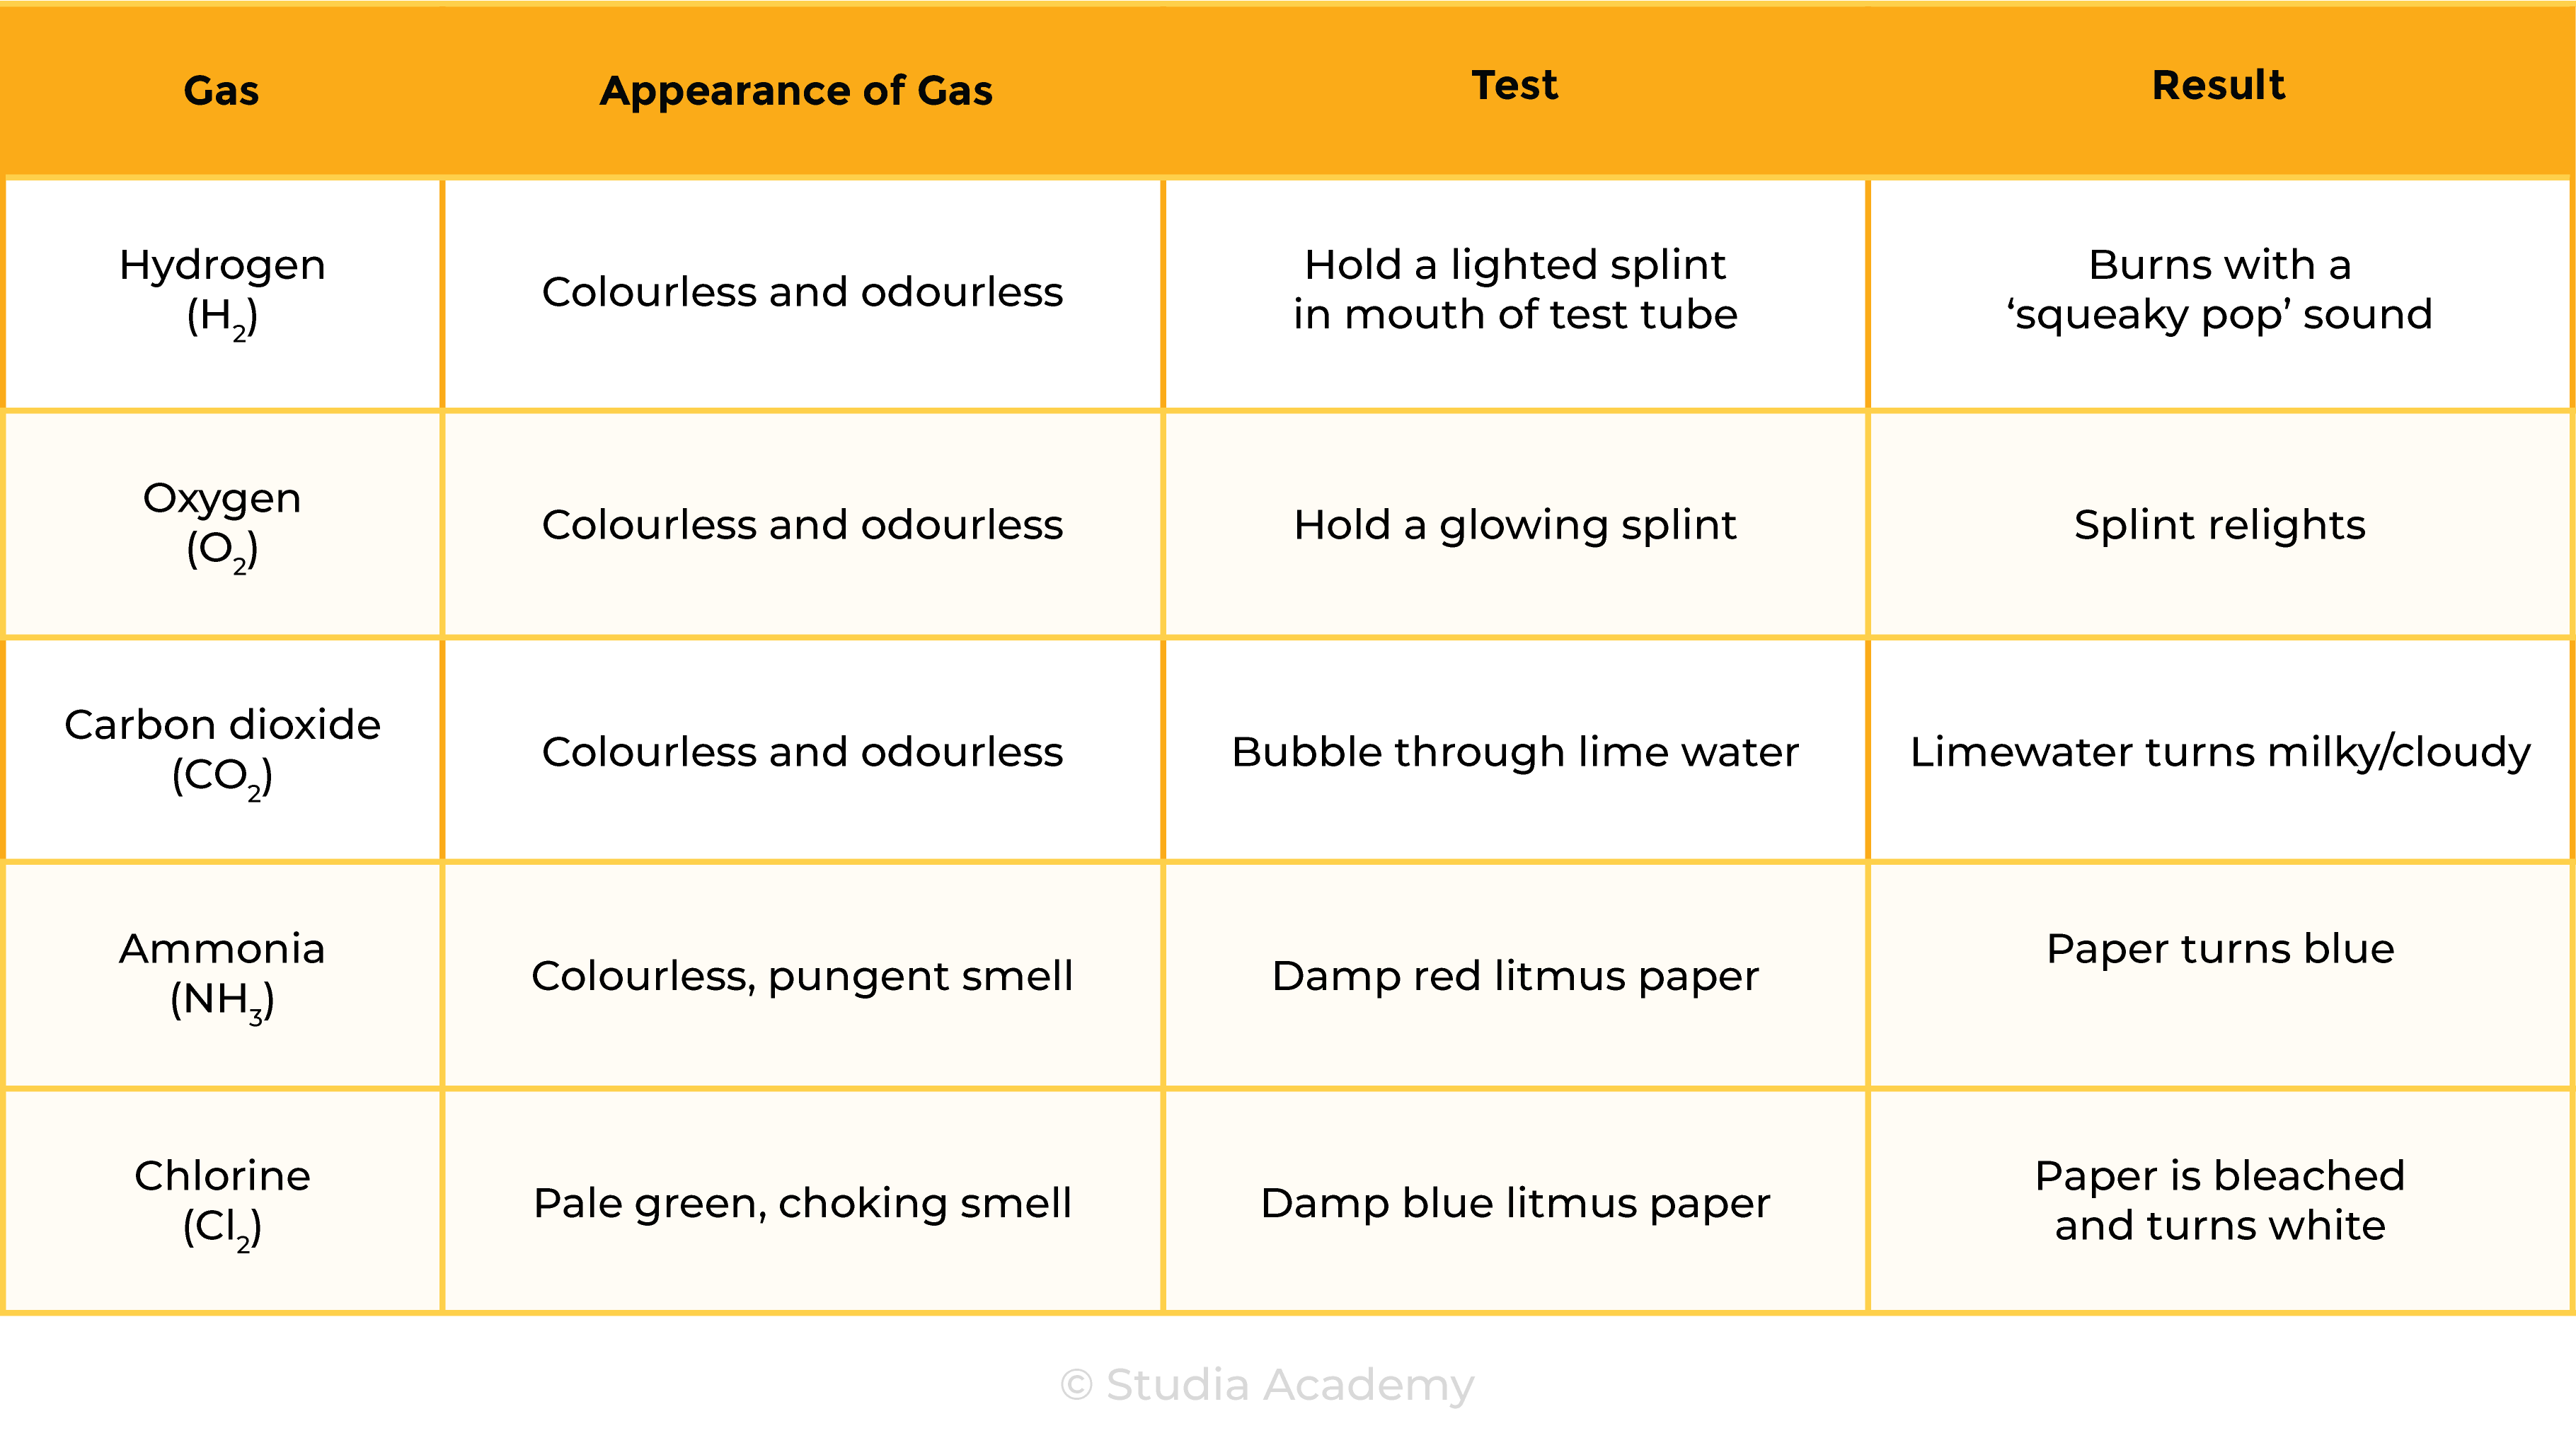 edexcel_igcse_chemistry_topic 17 tables_chemical tests_001_gas tests